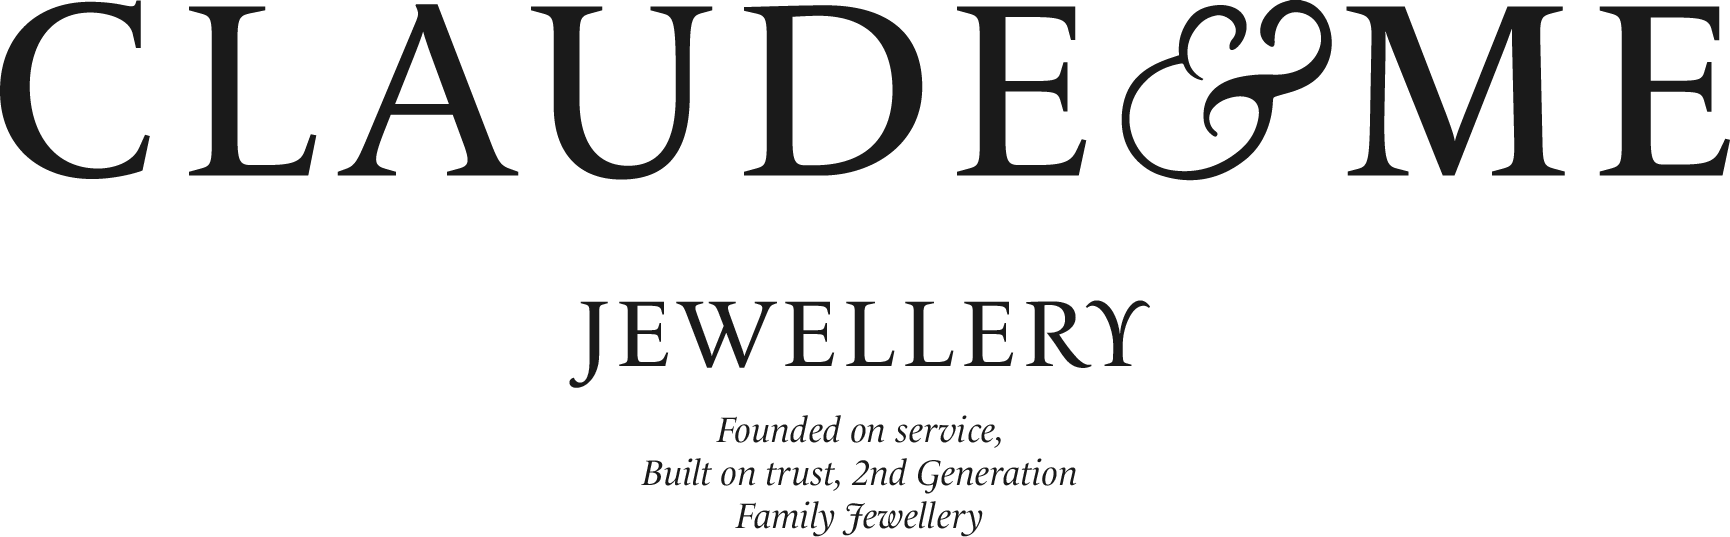 Claude & Me Jewellery, specialising in diamond jewellery and engagement rings. Founded on service, built on trust. Proud family jewellery Brisbane.